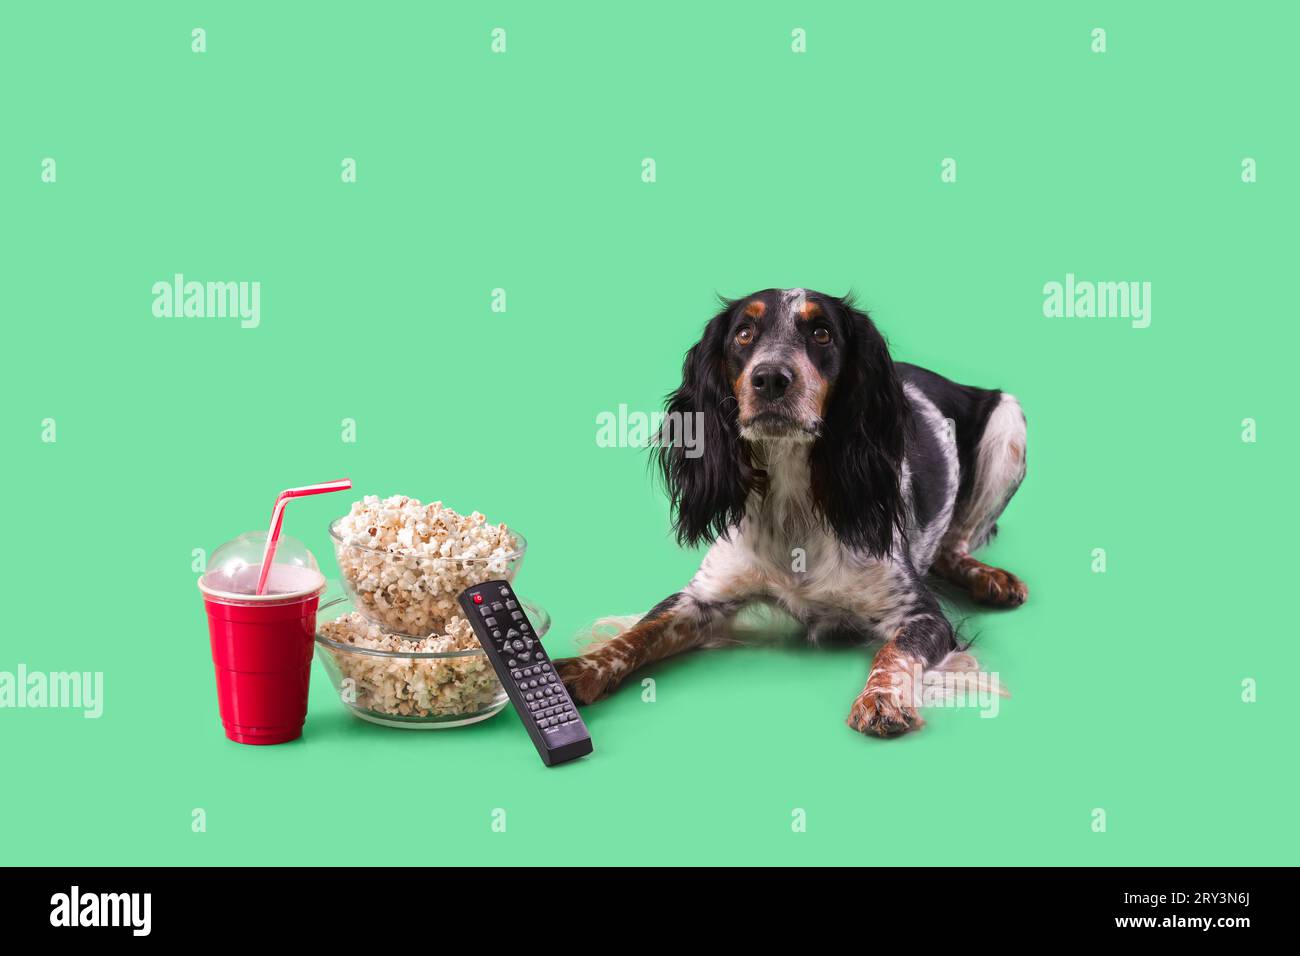 Cute cocker spaniel dog with bowls of popcorn, soda and TV remote lying on green background Stock Photo